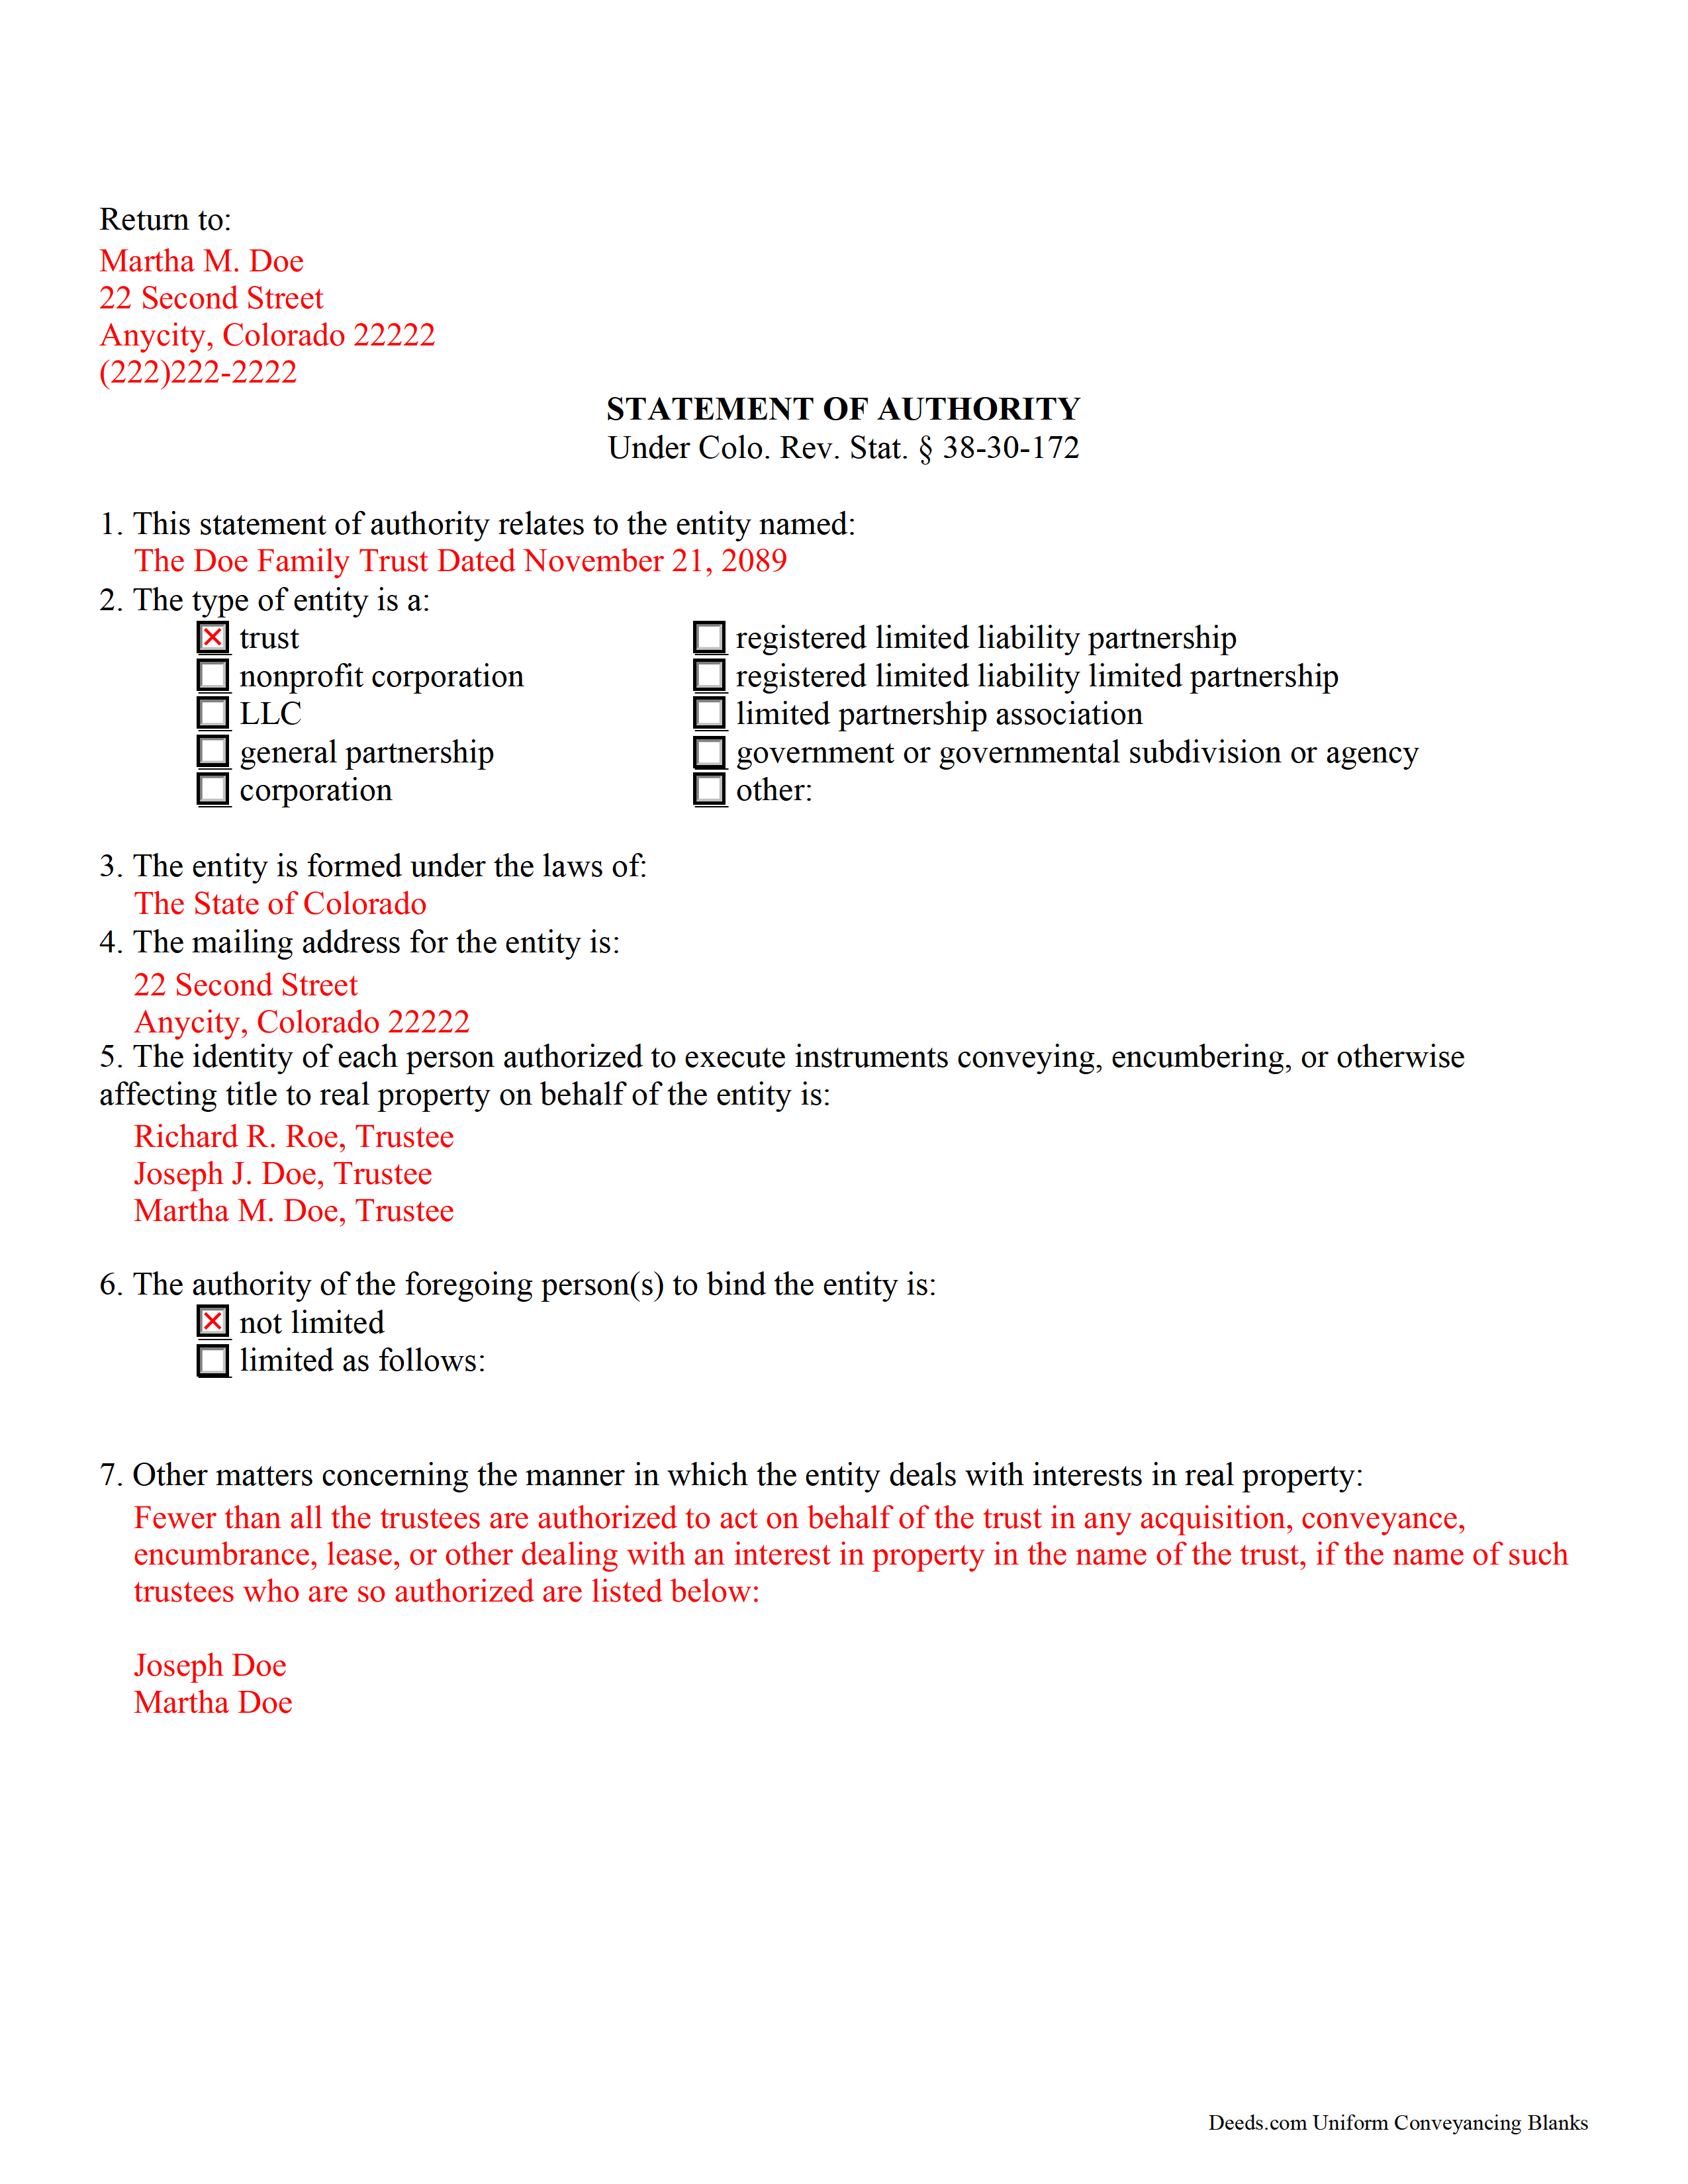 Completed Example of the Statement of Authority Form